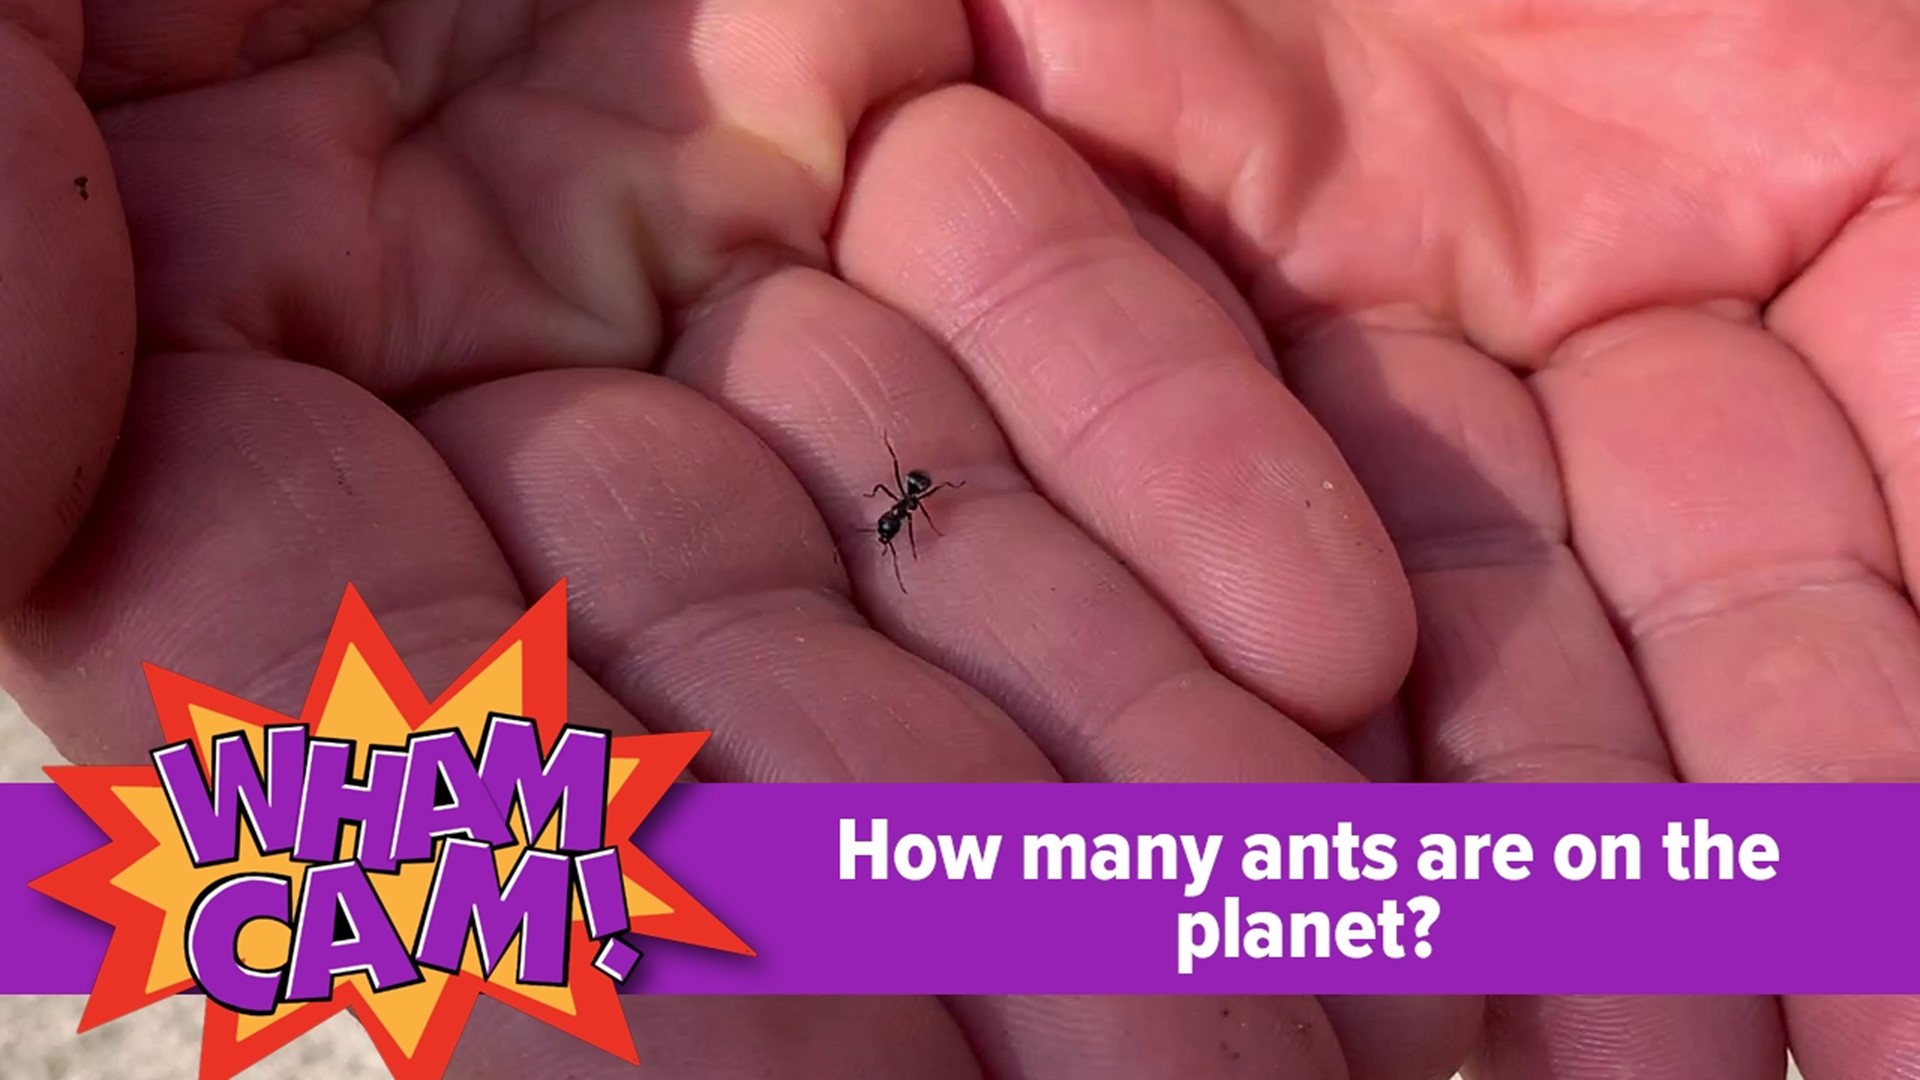 Ever wonder how many ants are on the planet and how much they weigh altogether? Joe was in Dickson City to see if anyone there had the answer.